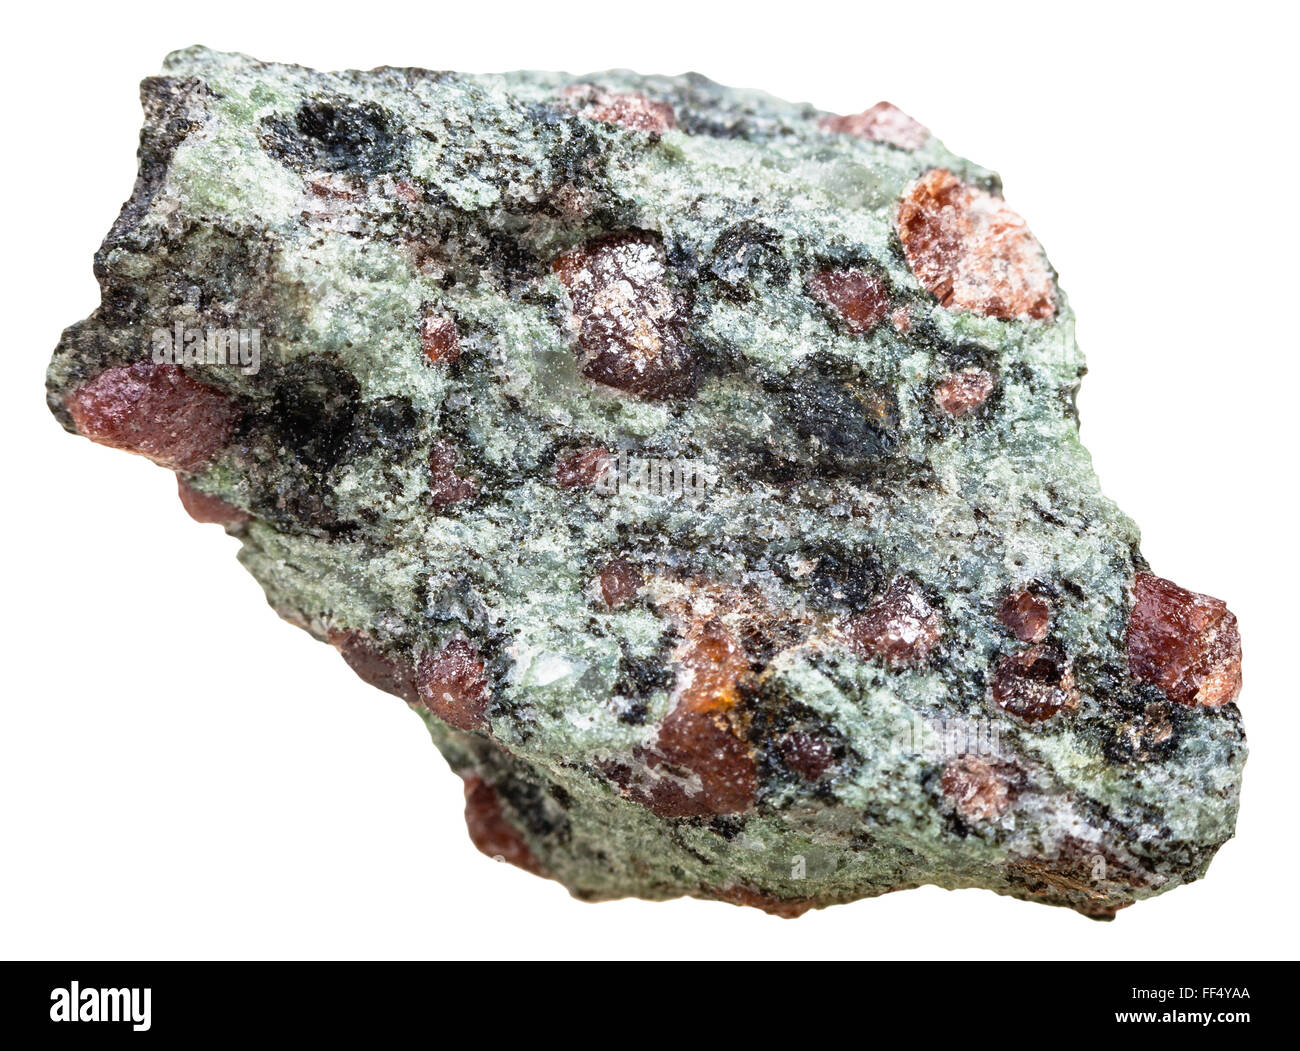 macro shooting of natural mineral stone - Eclogite piece with garnet (red) and omphacite (greyish-green) groundmass crystalline Stock Photo